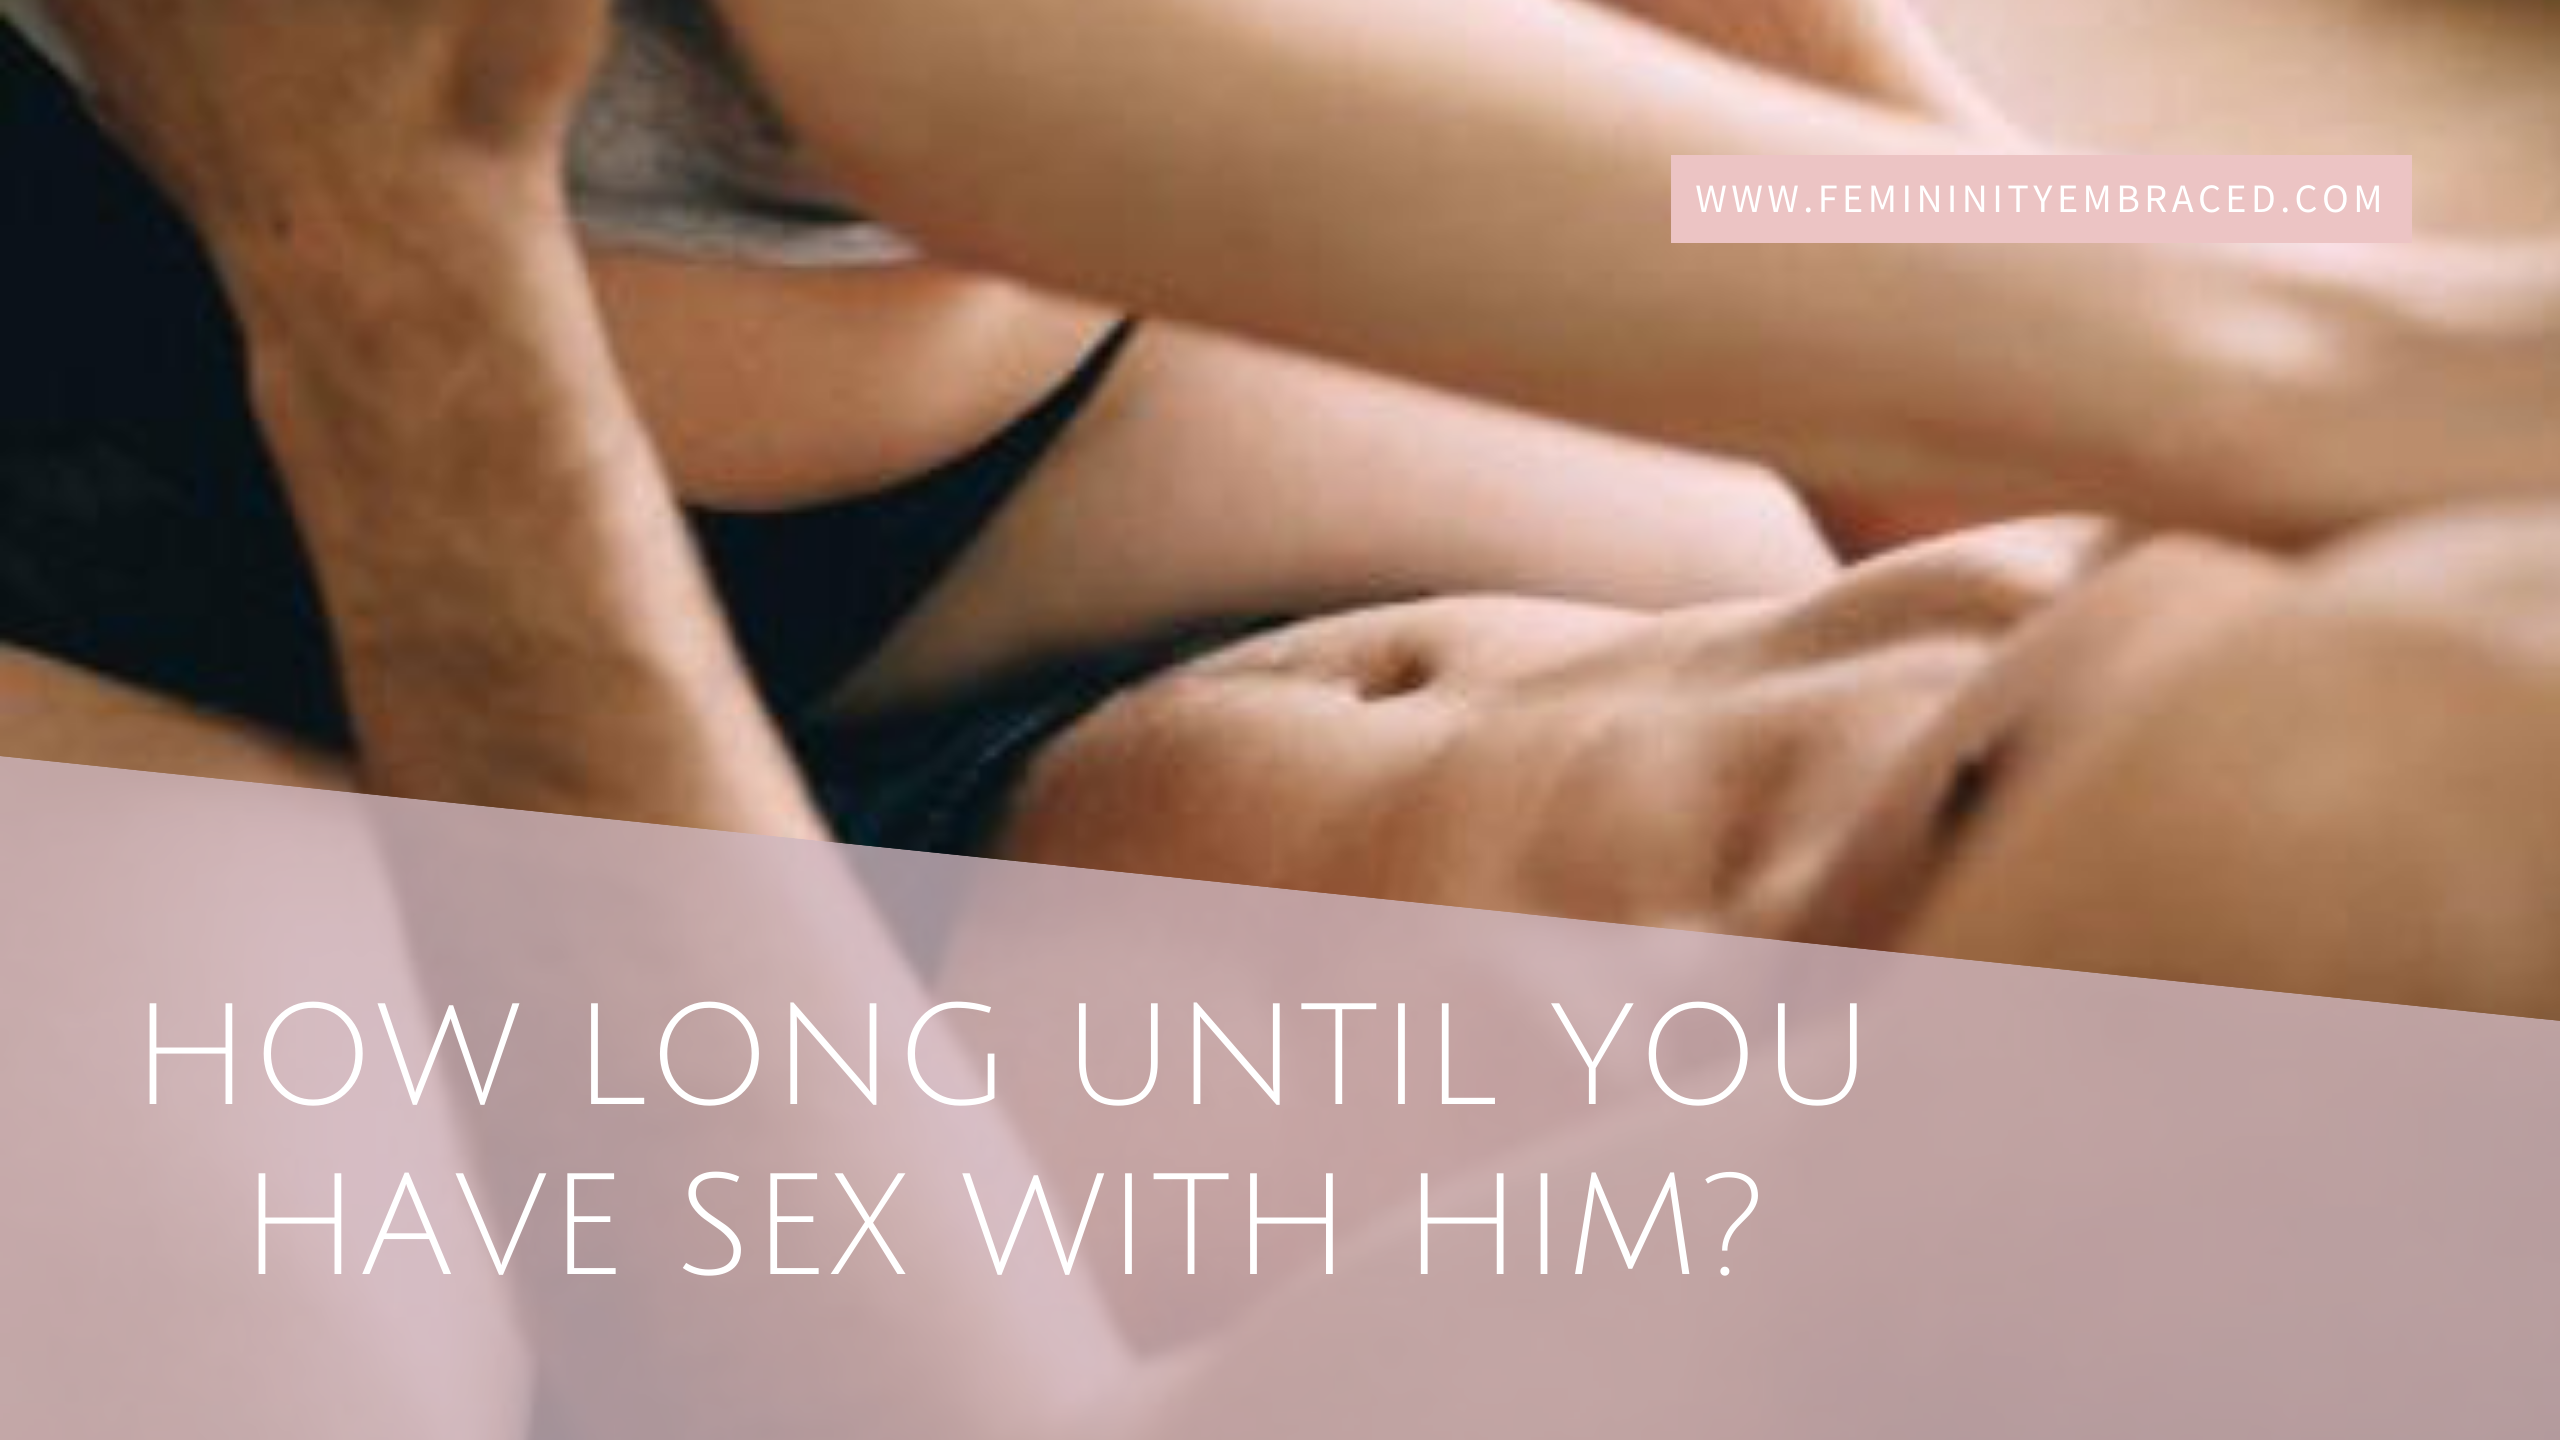 HOW LONG UNTIL YOU HAVE SEX WITH HIM